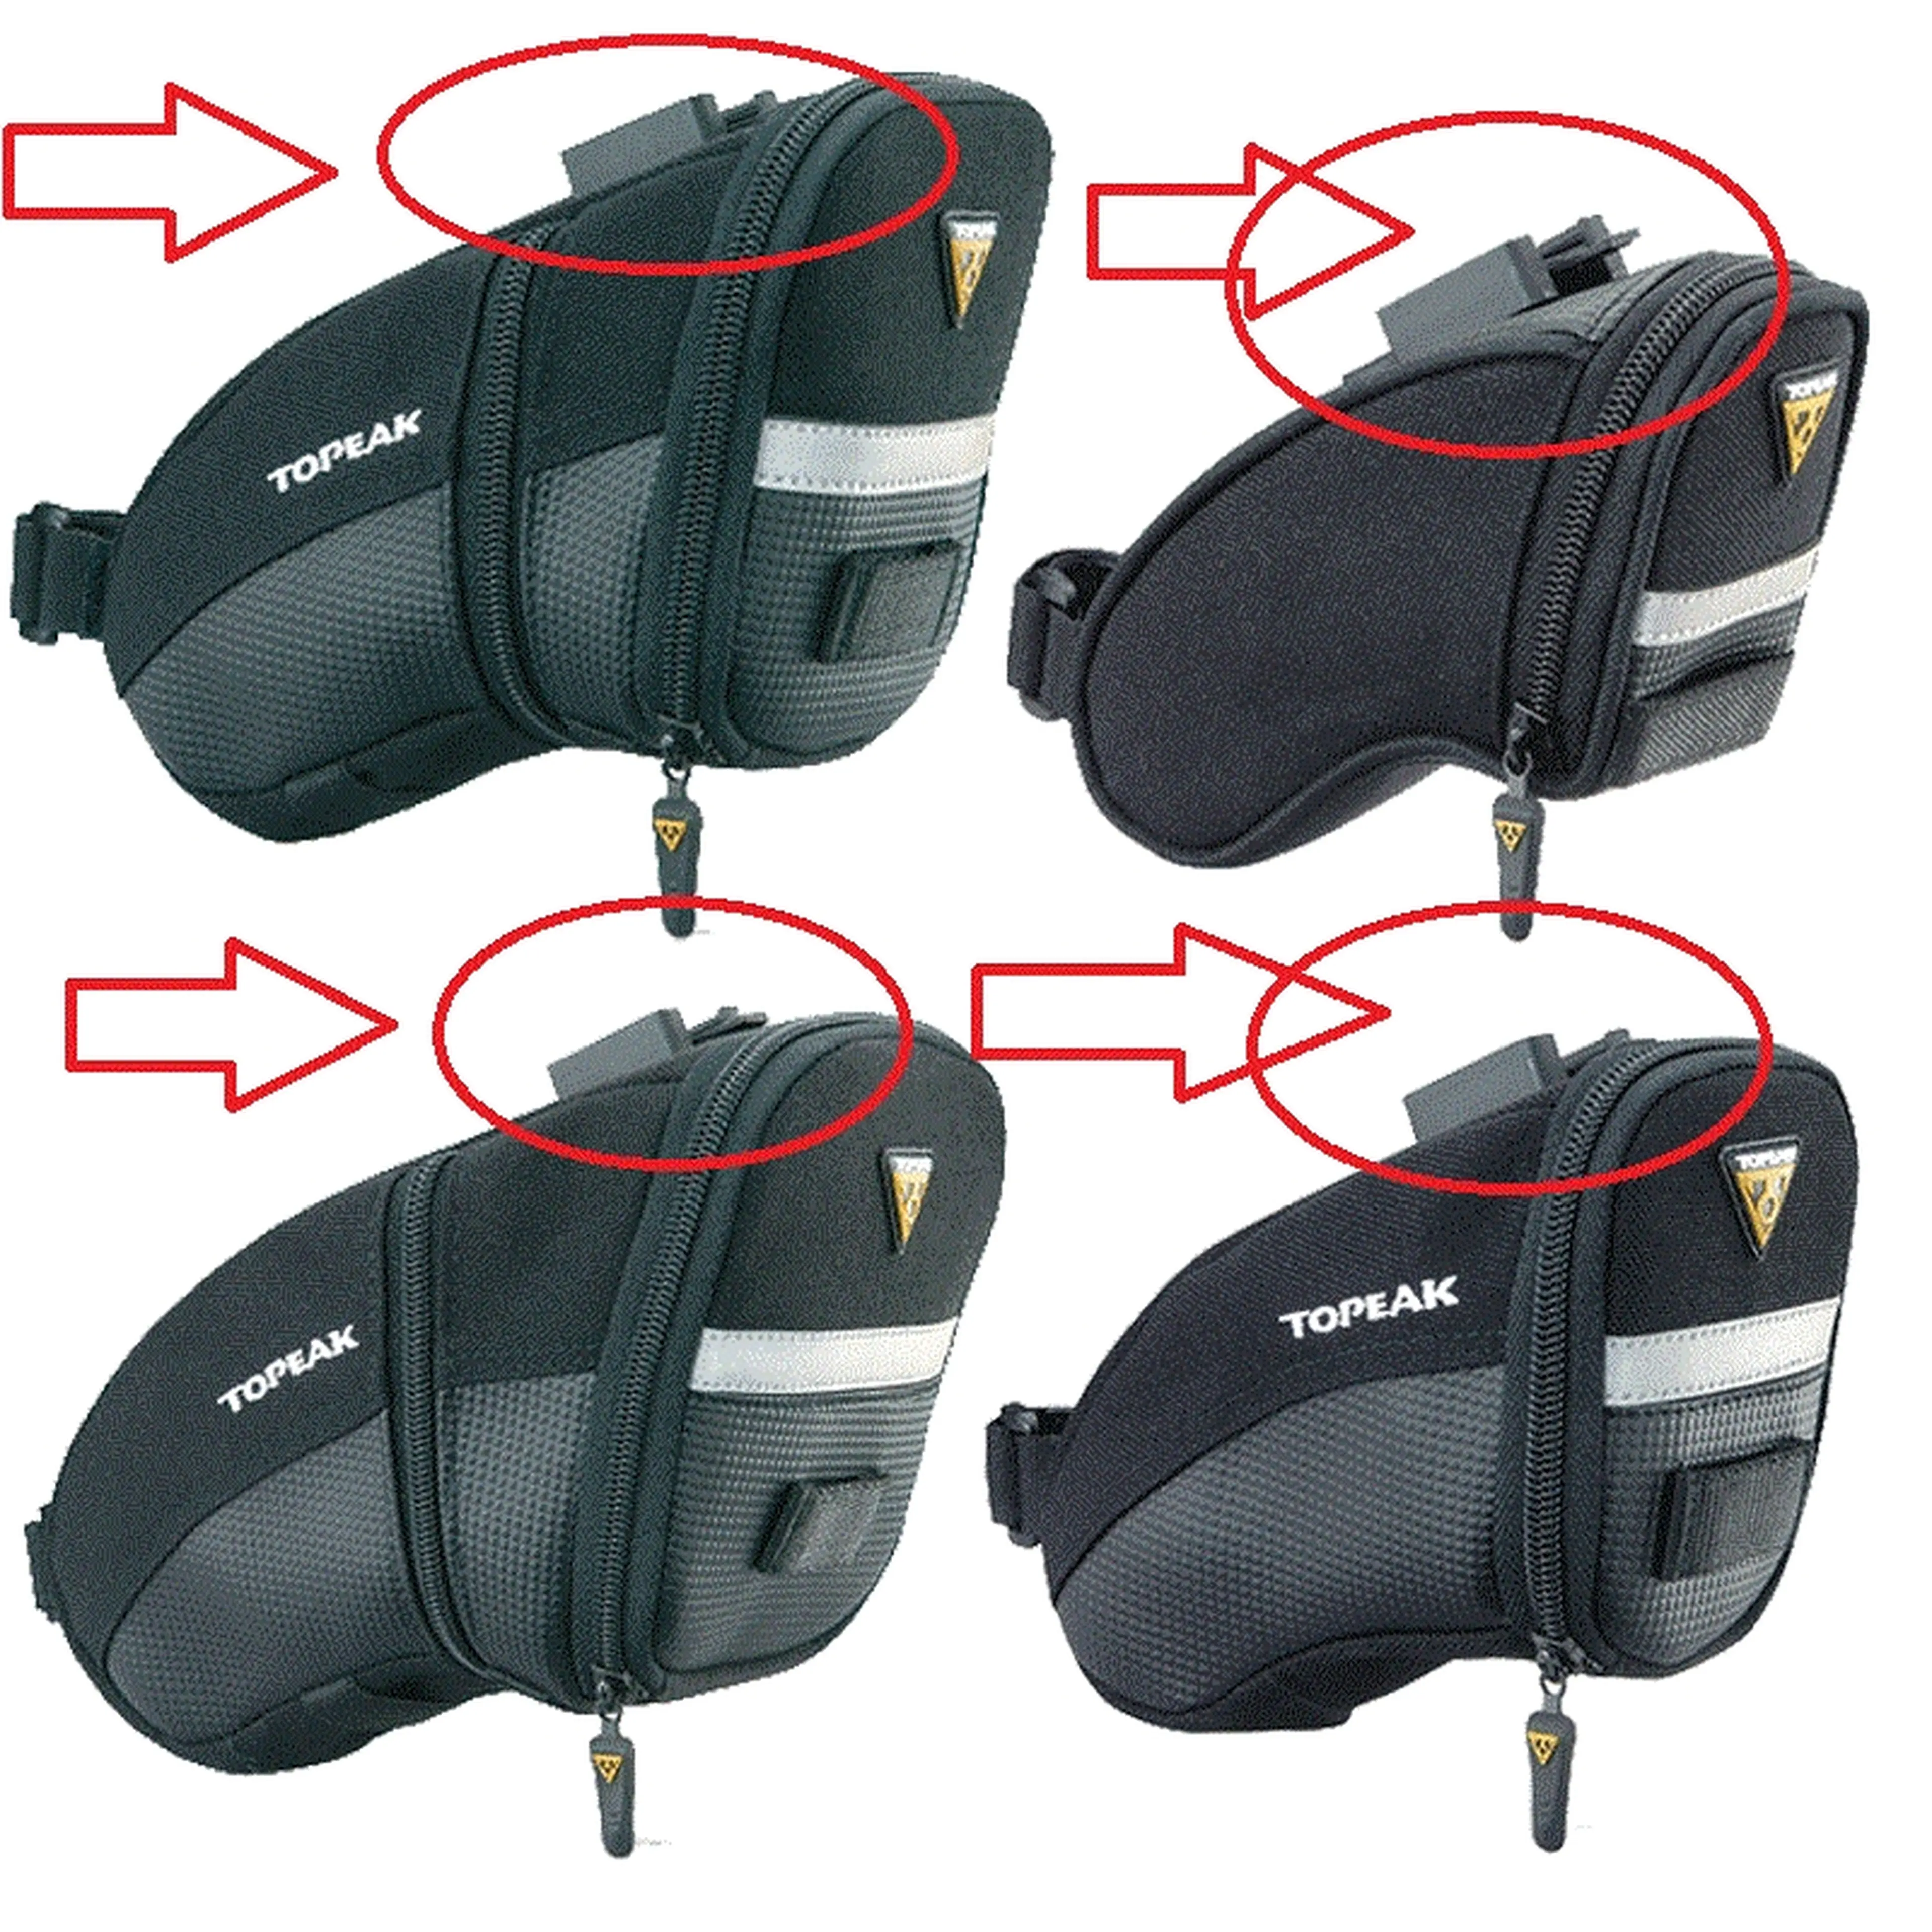 6. Topeak, CUBE  Saddle Adapter for CLICK Saddle Bags